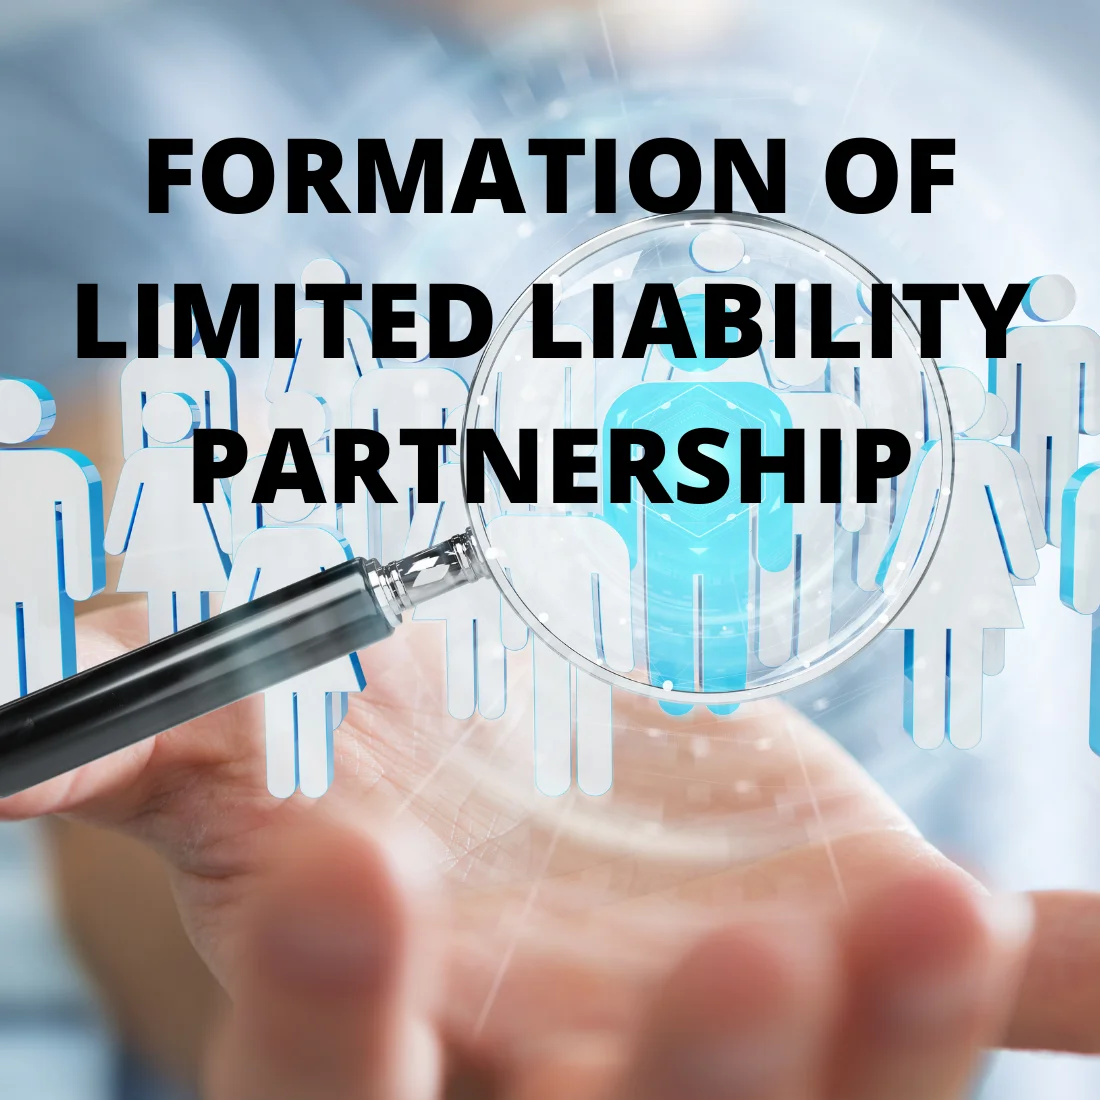 Formation of Limited Liability Partnership